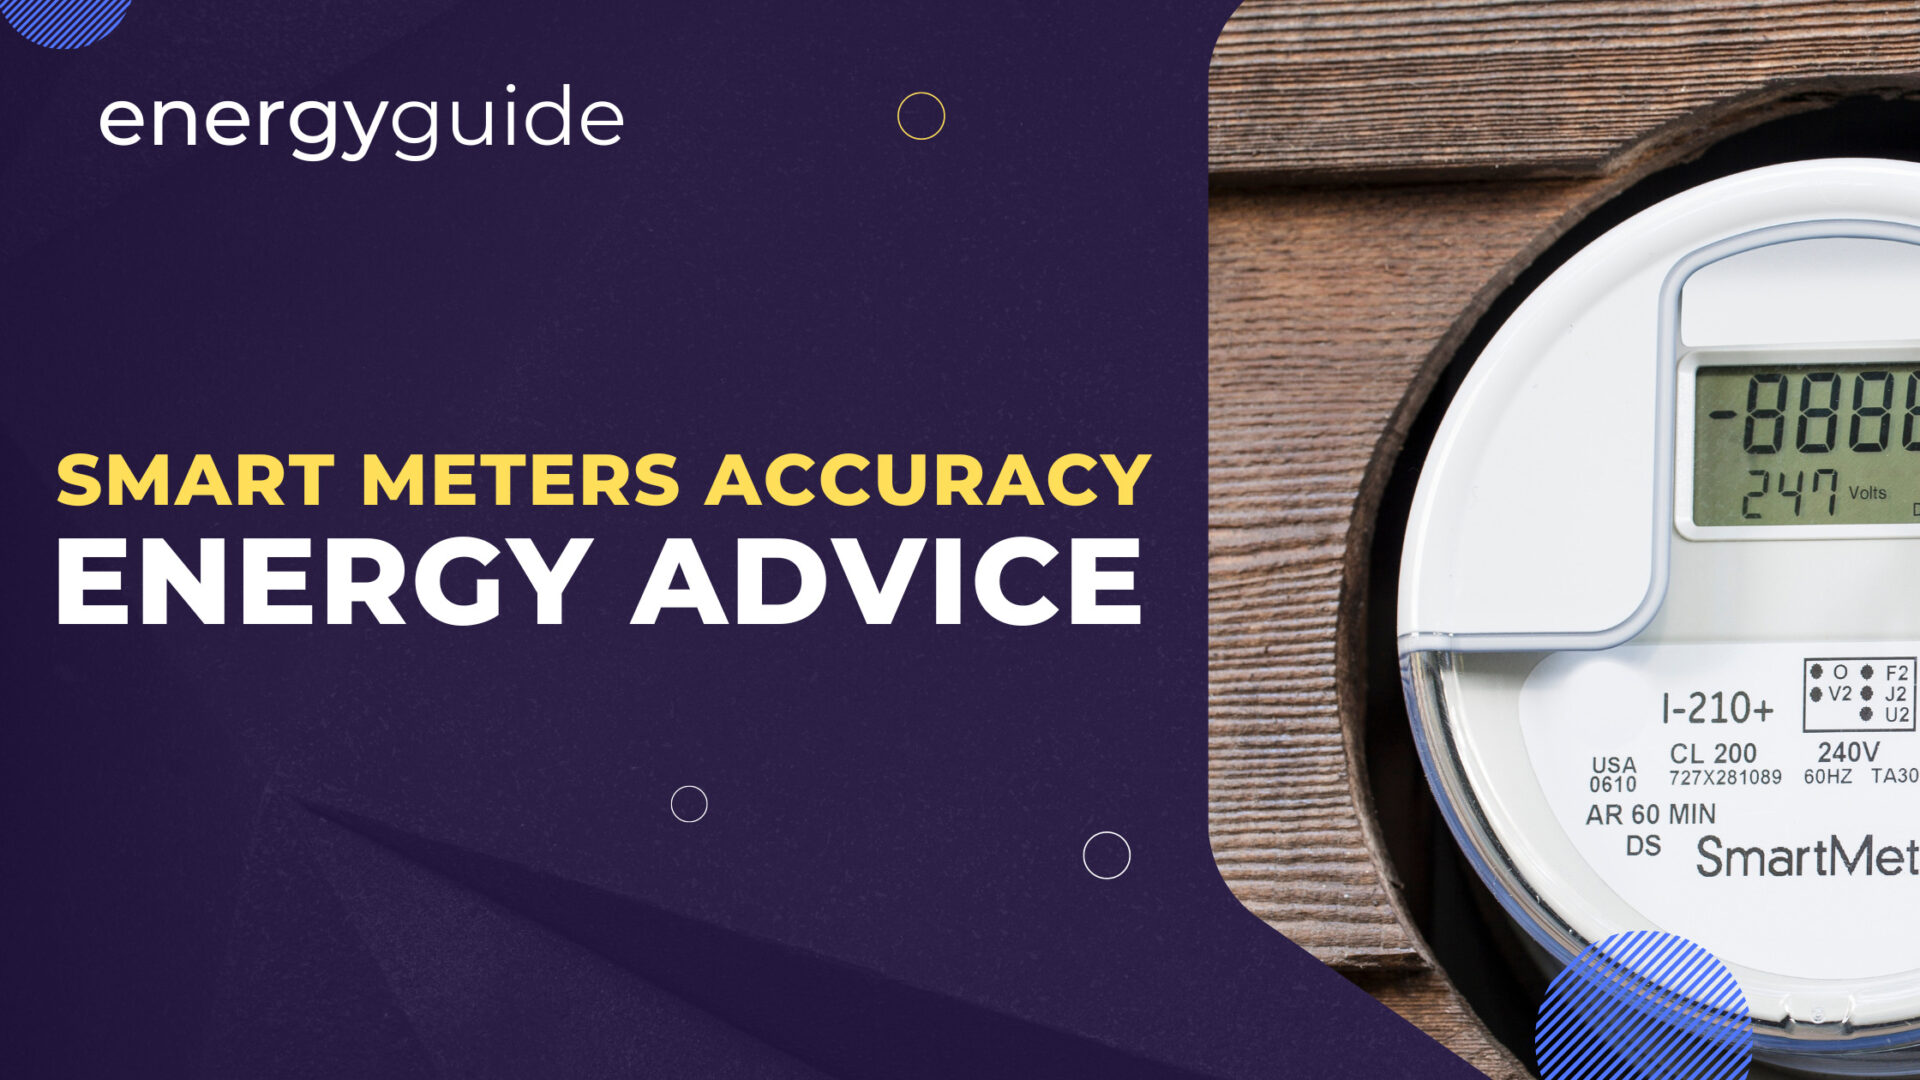 Are Smart Meters Accurate